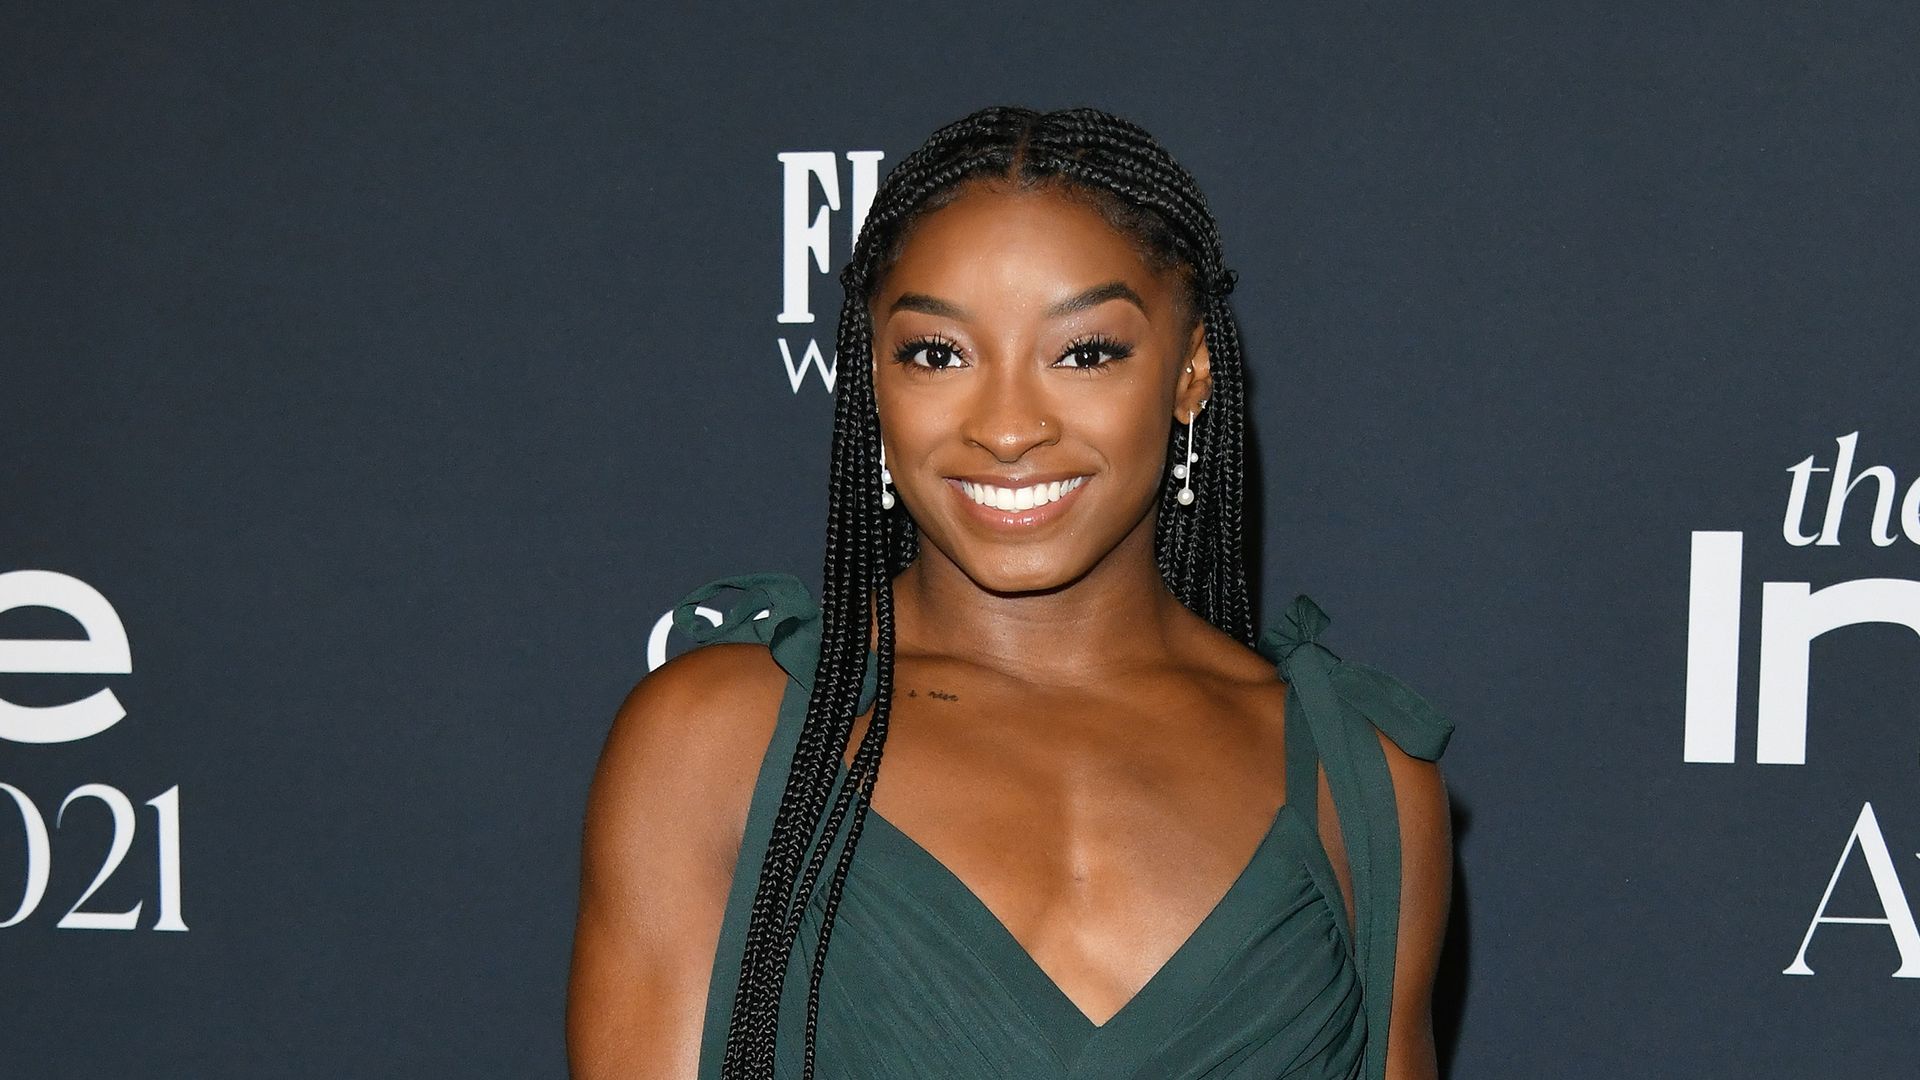 Simone Biles attends the 6th Annual InStyle Awards on November 15, 2021 in Los Angeles, California